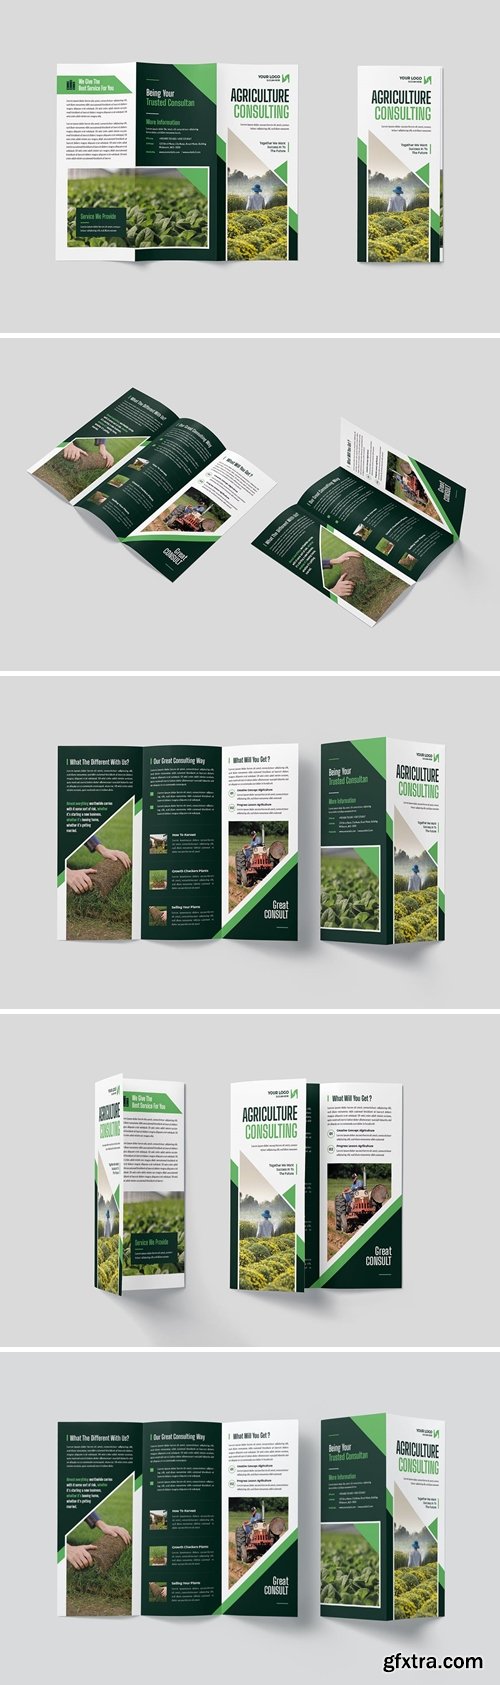 Agriculture Consulting Trifold Brochure